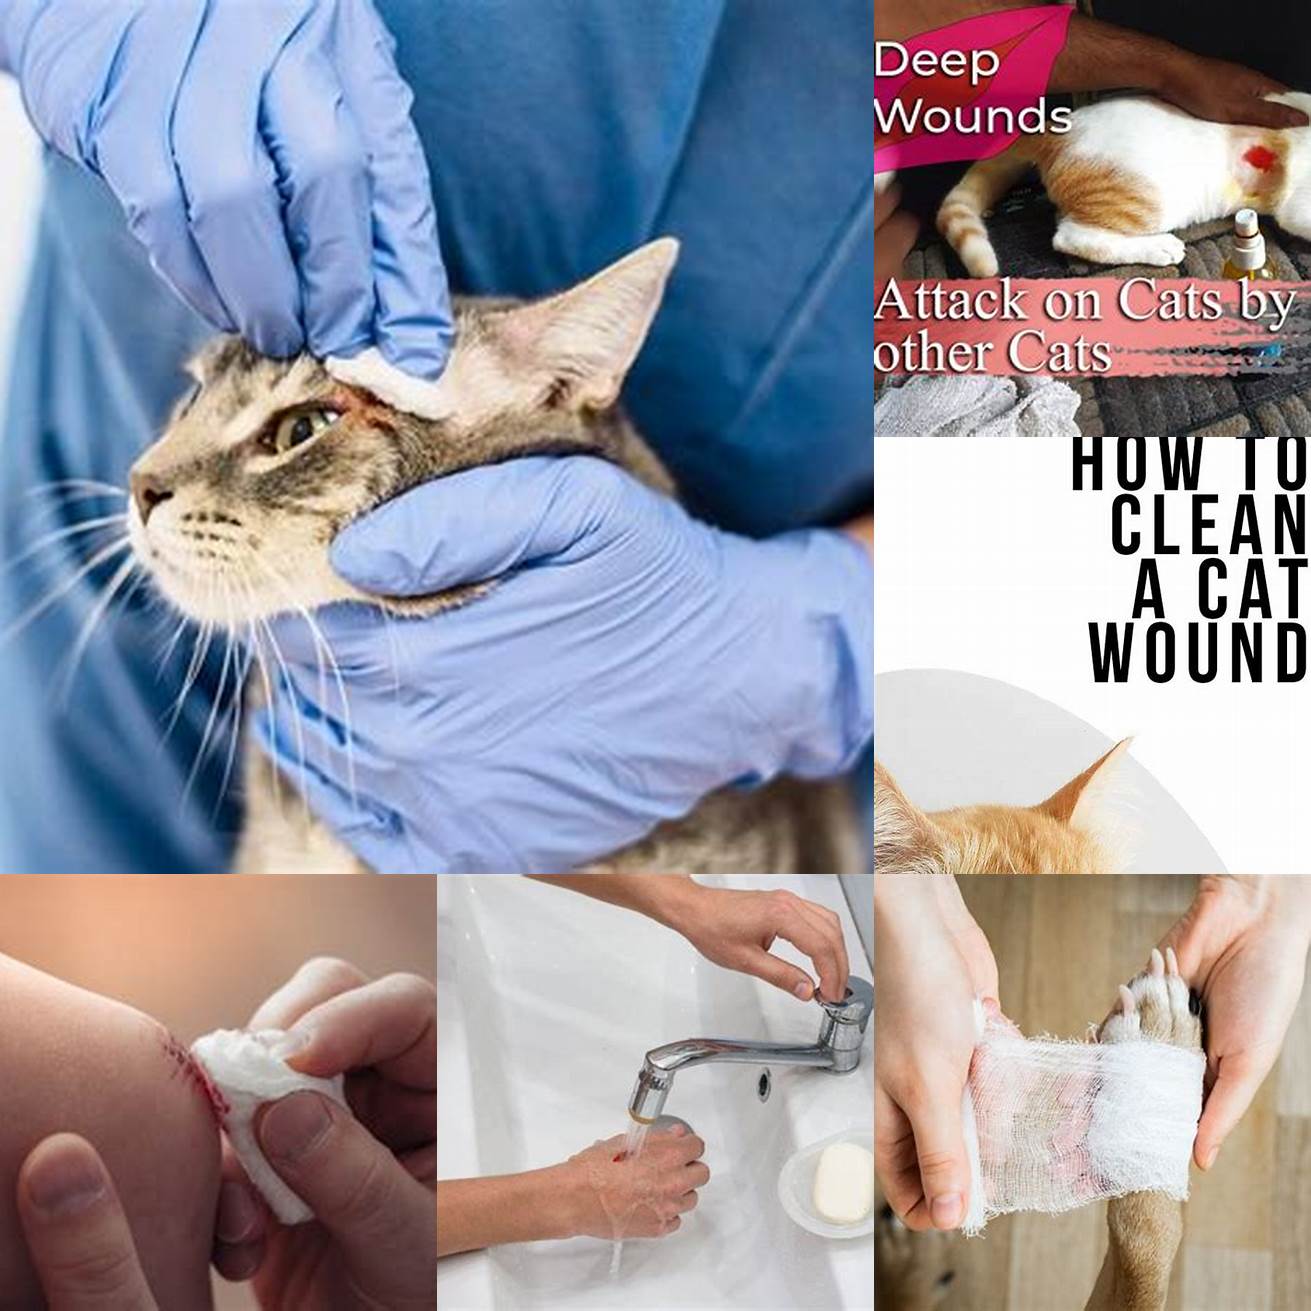 Clean the wound with lukewarm water and soap